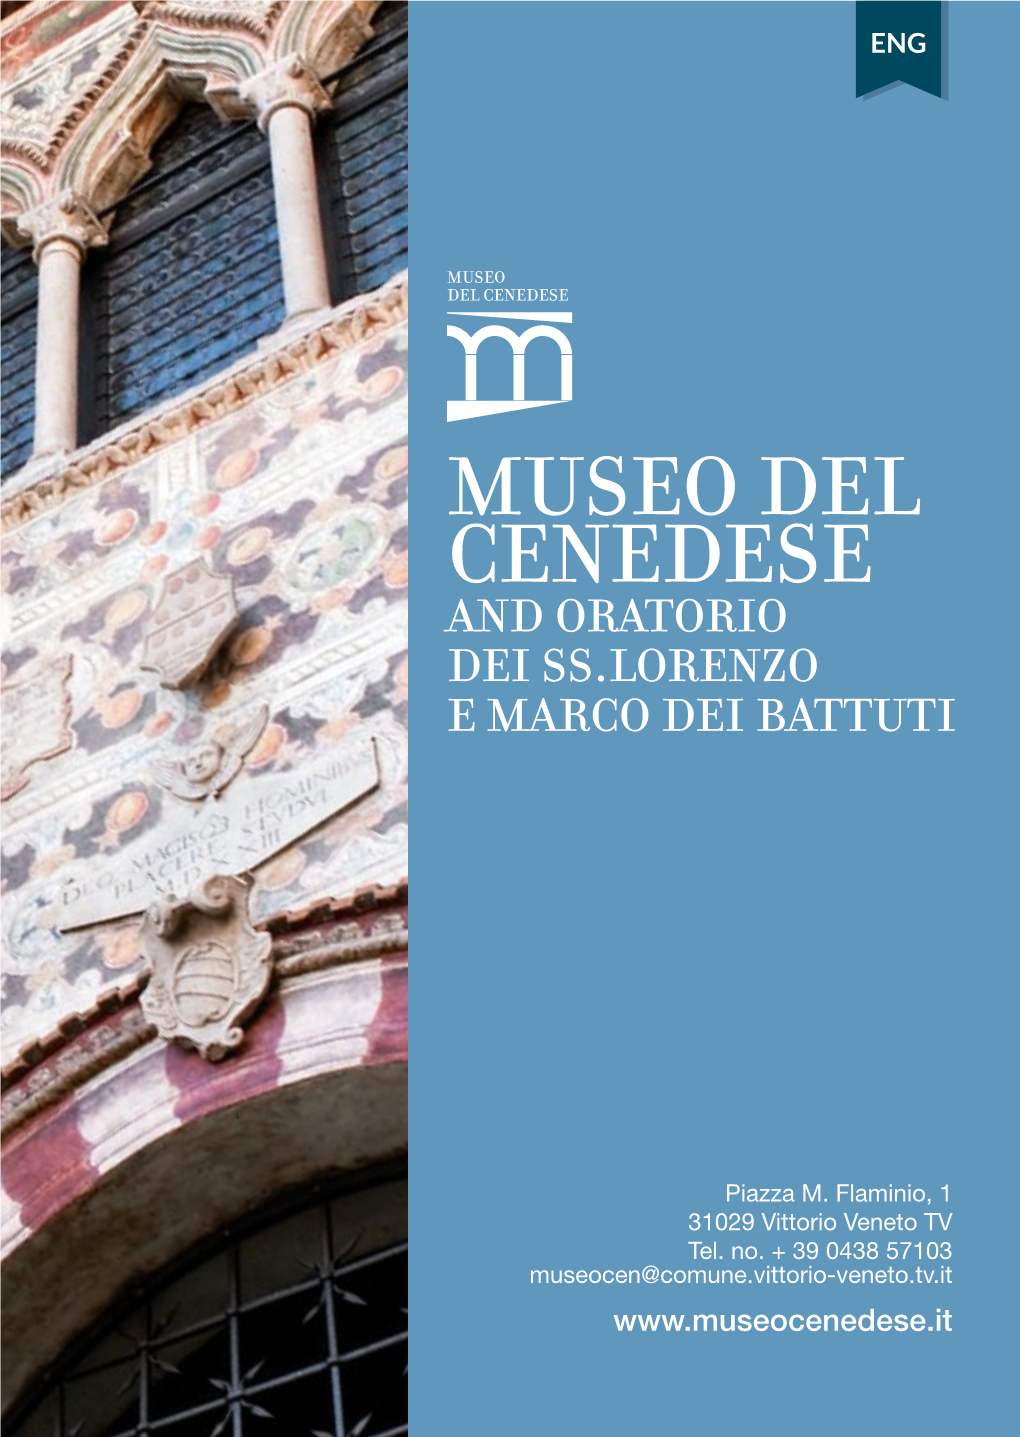 Museo-Cenedese-ENG.Pdf